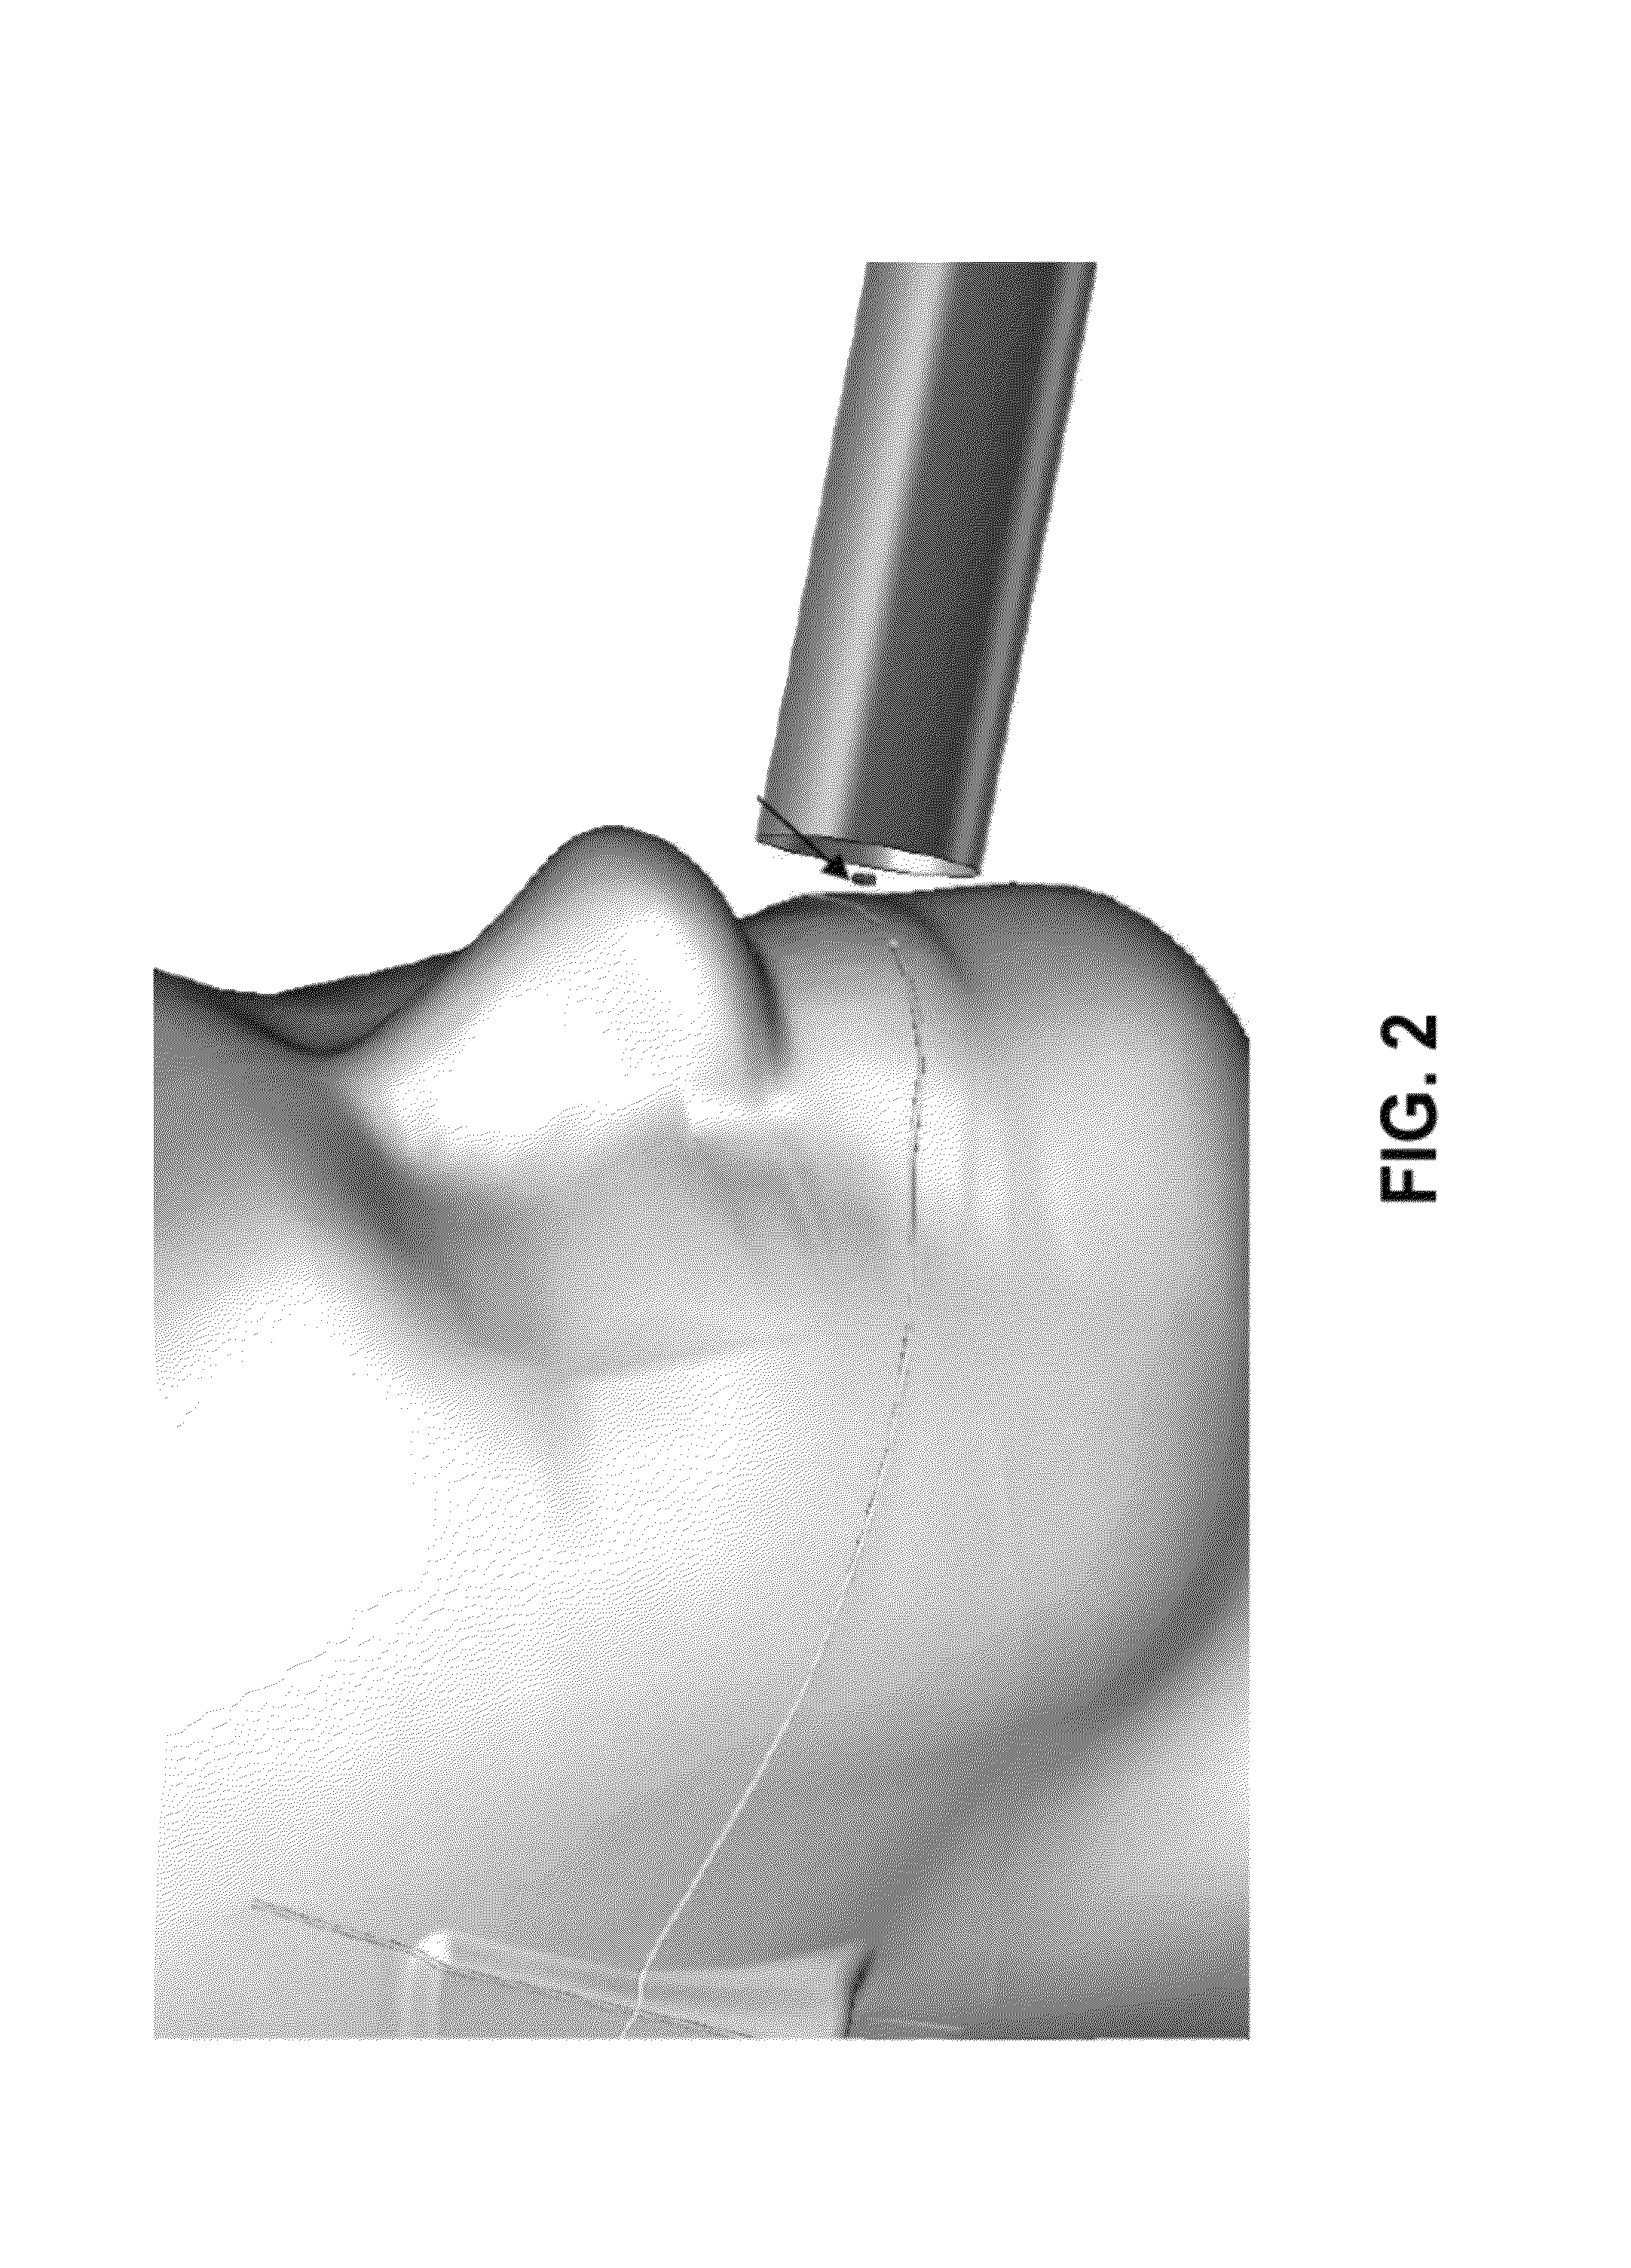 Method and device of estimating a dose of ionizing radiation